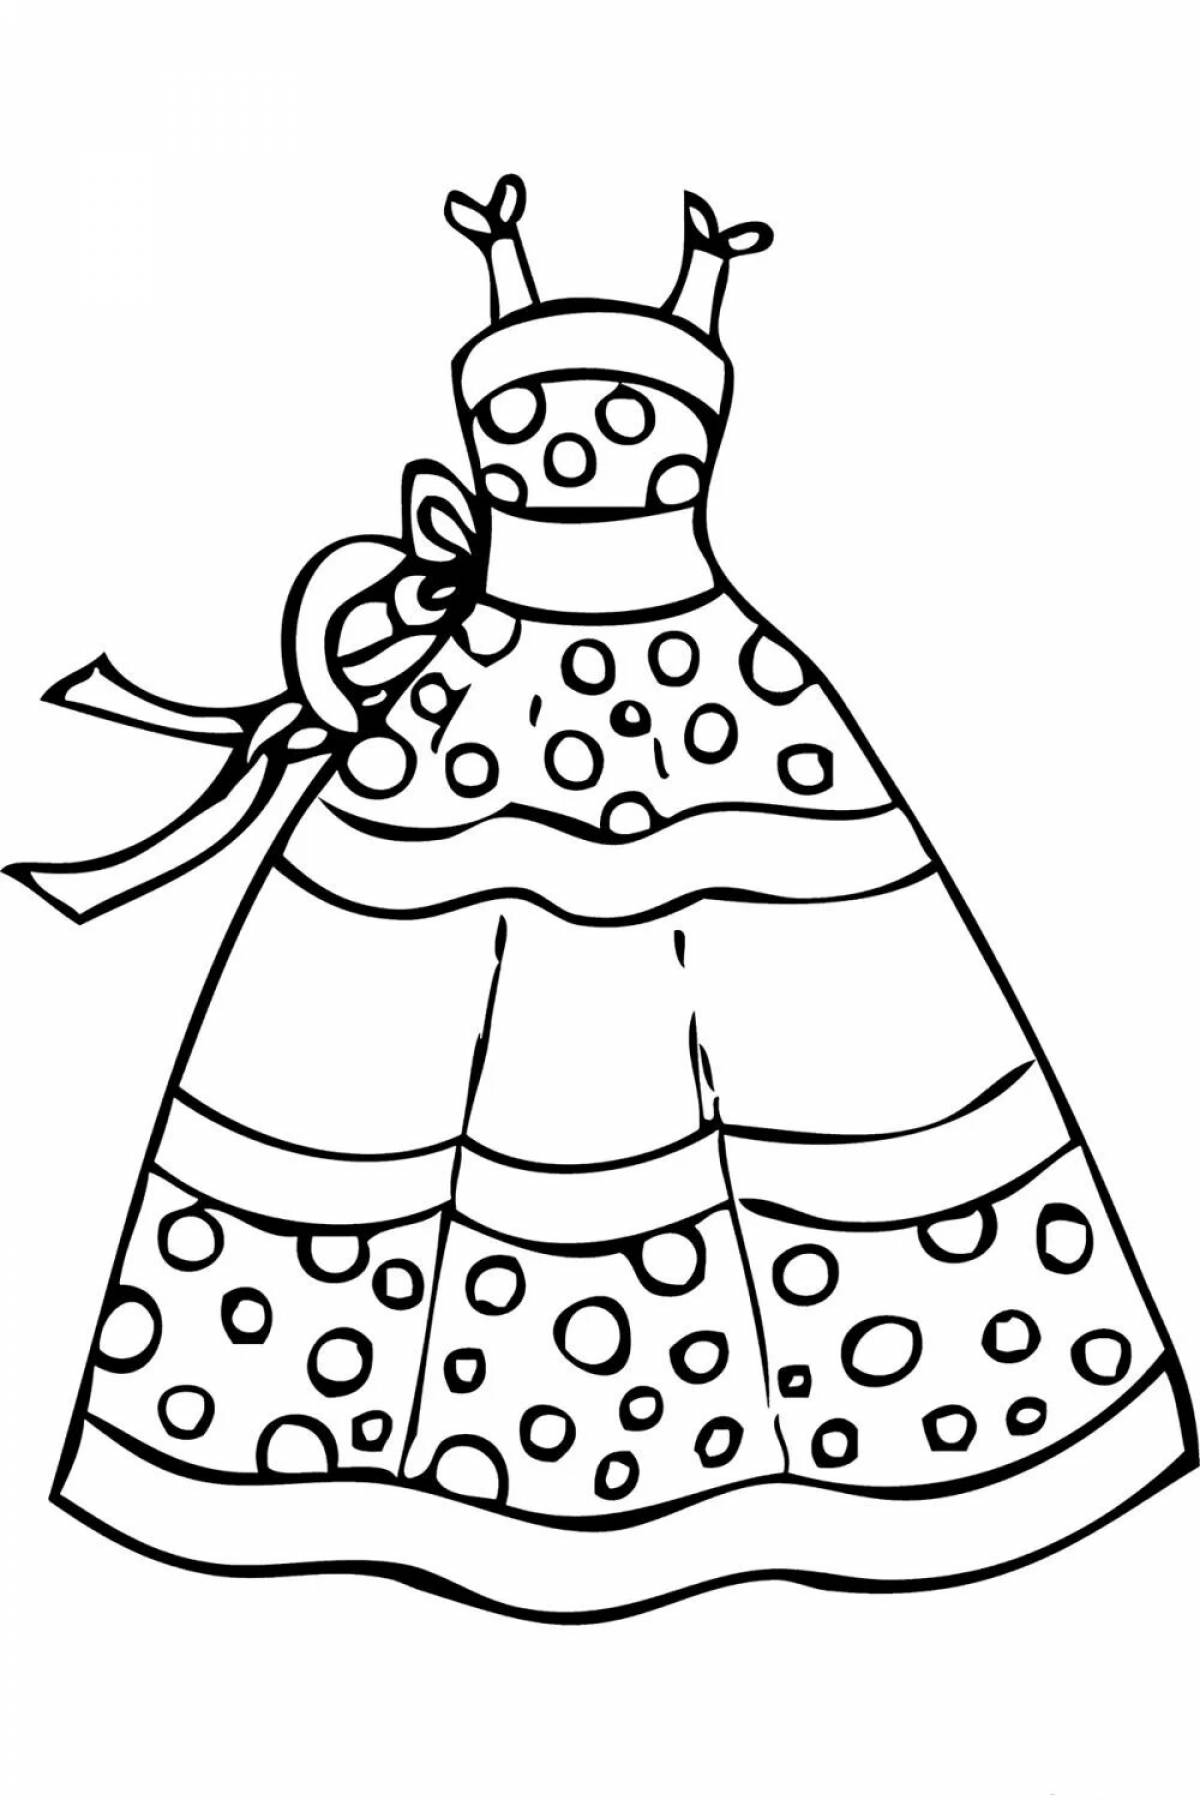 Coloring page dramatic dress for mom